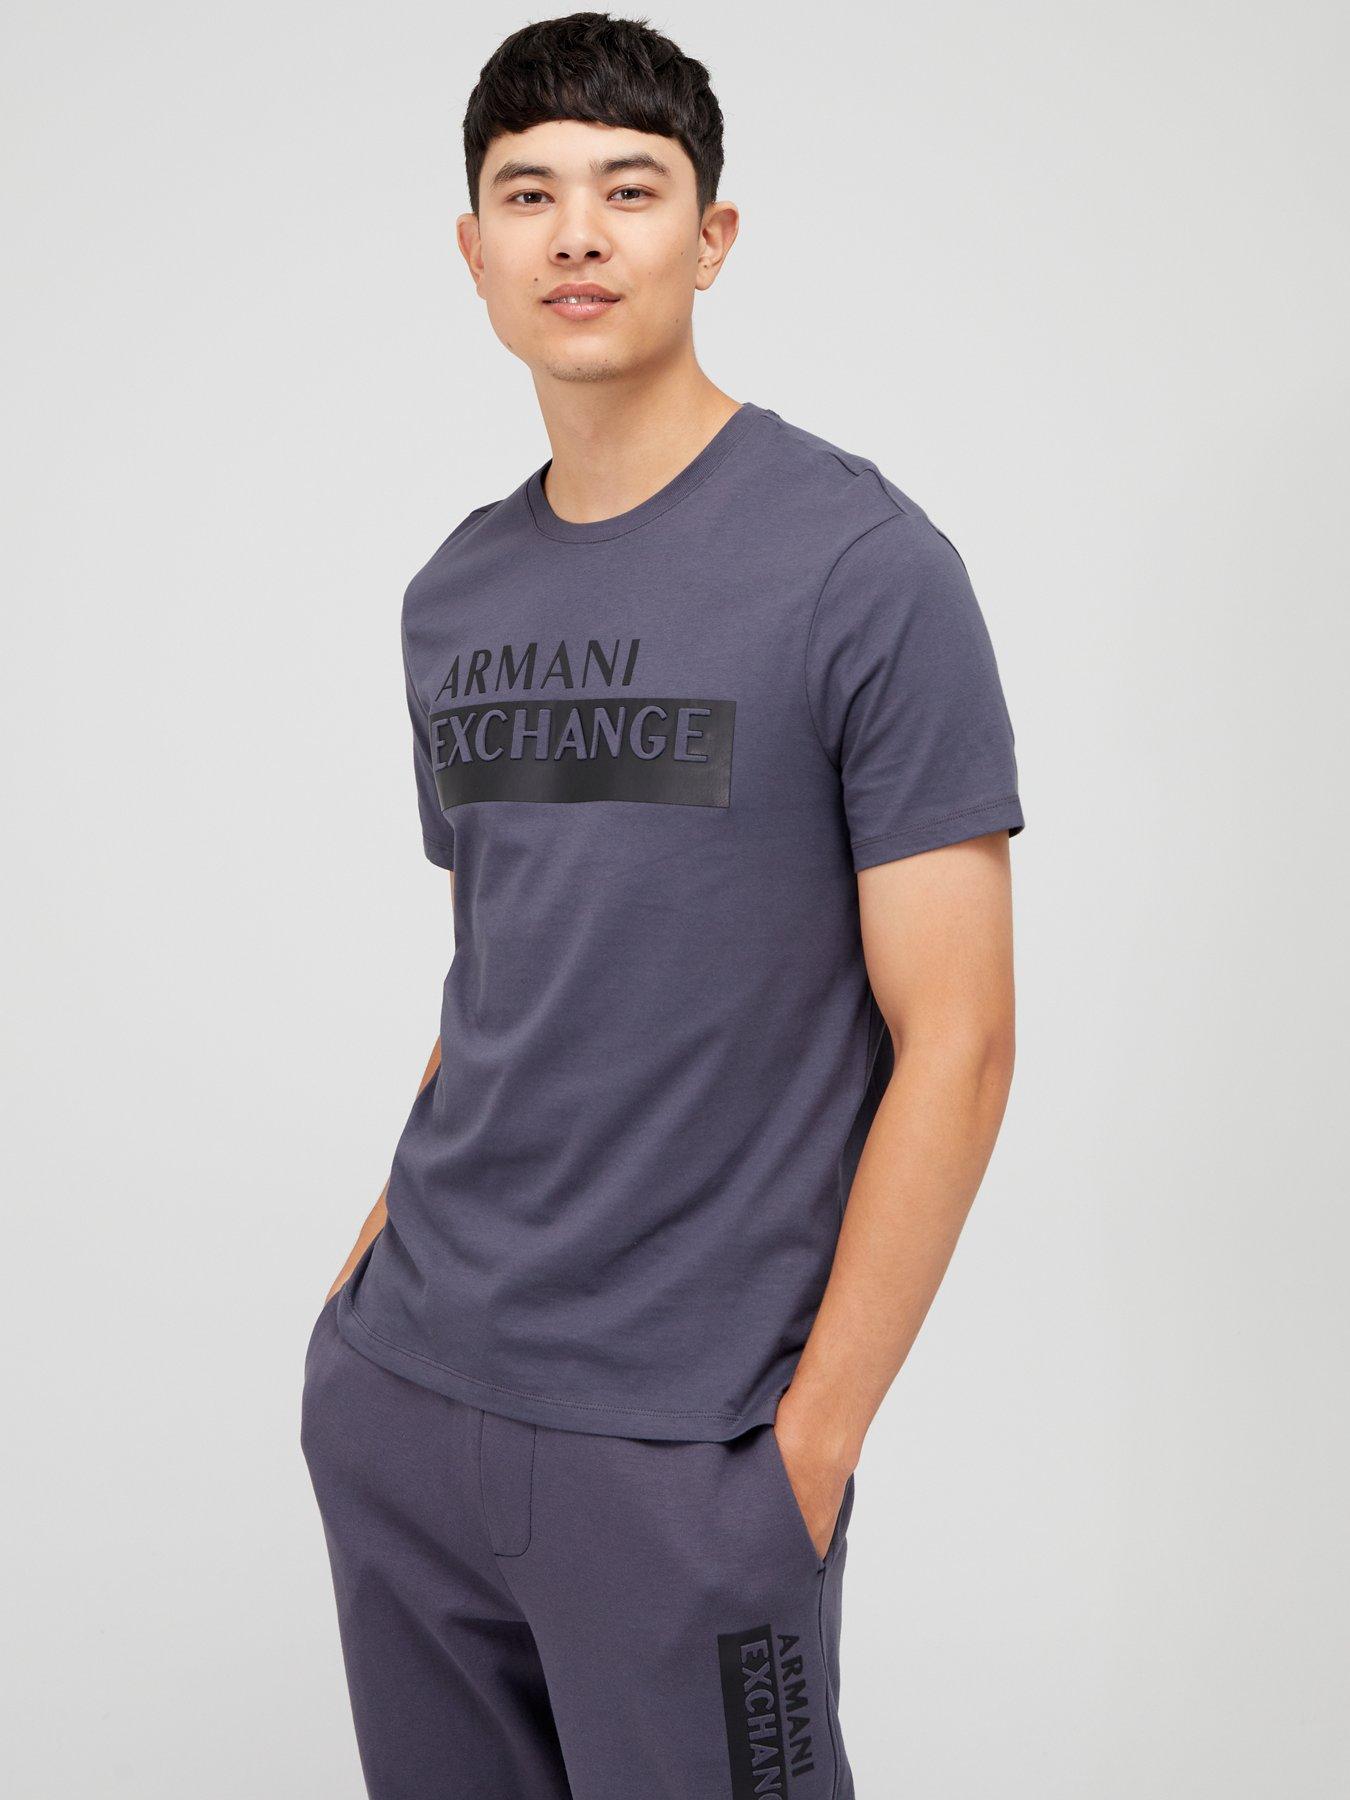 All Black Friday Deals | All Offers | Armani exchange 